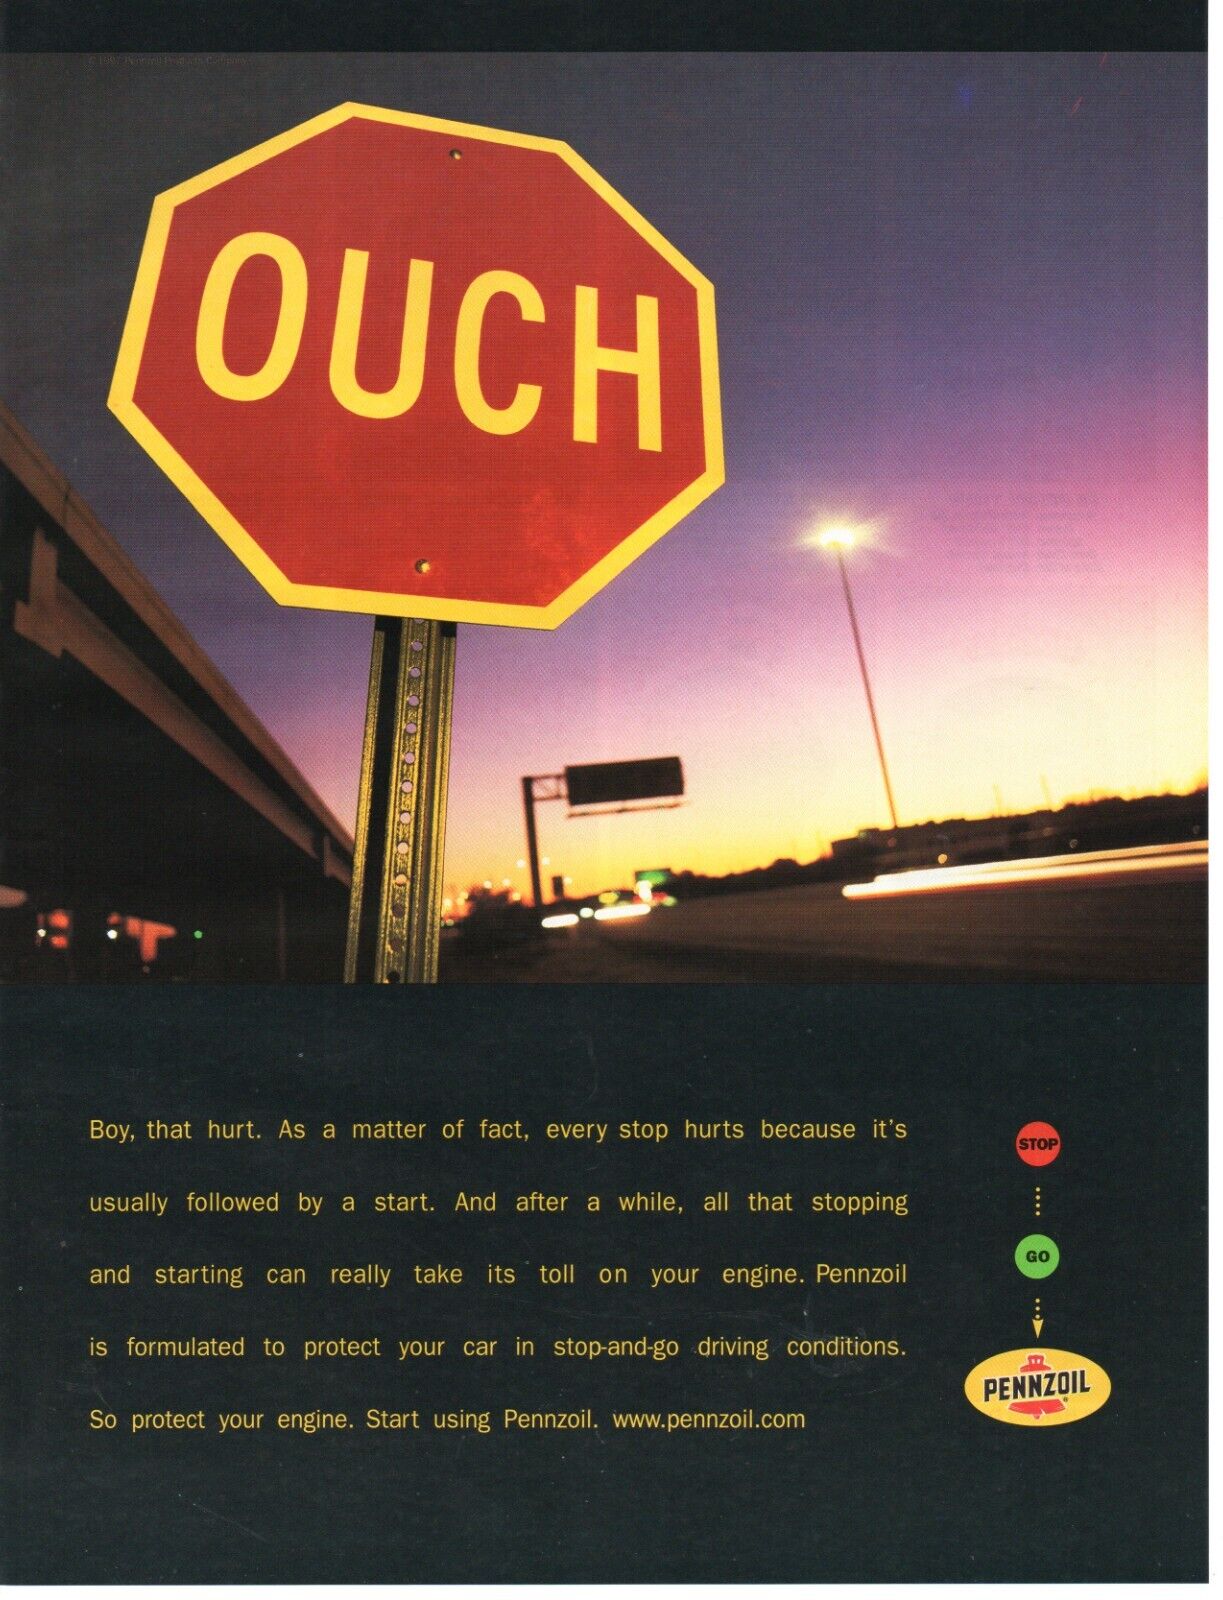 1997 PENNZOIL Motor Oil NASCAR Racing PRINT AD WALL ART - OUCH EVERY STOP HURTS